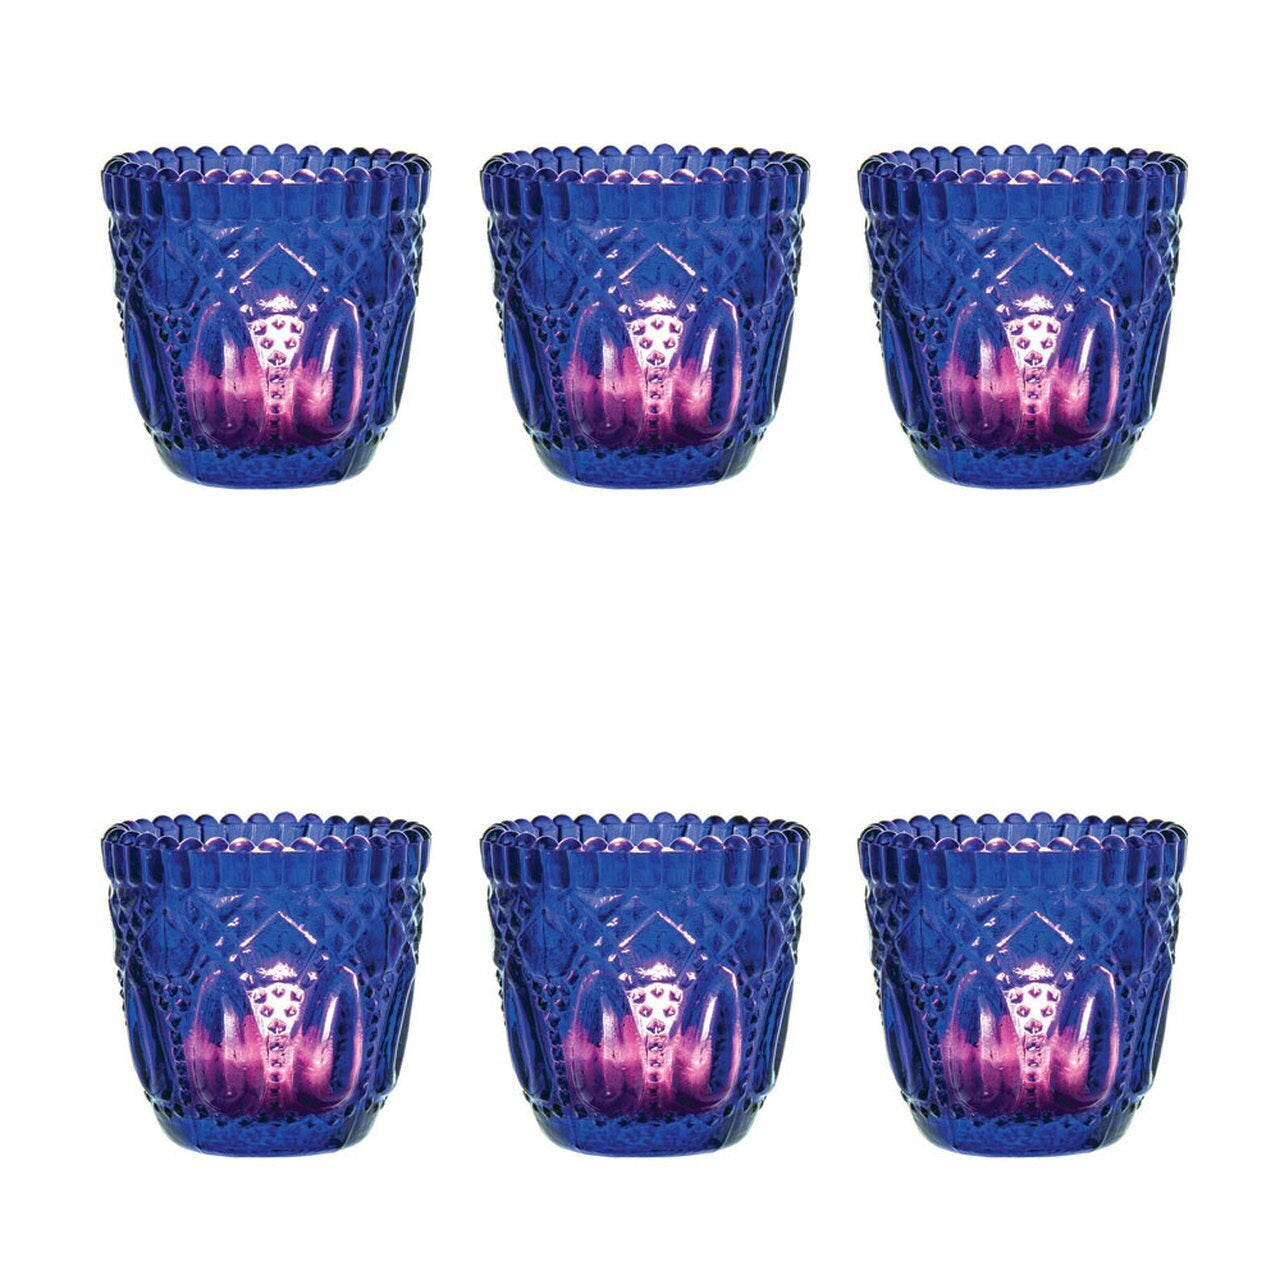 6 Pack | Faceted Vintage Glass Candle Holders (2.75-Inch, Lillian Design, Royal Purple) - Use with Tea Lights - For Home Decor, Parties and Wedding Decorations - PaperLanternStore.com - Paper Lanterns, Decor, Party Lights & More